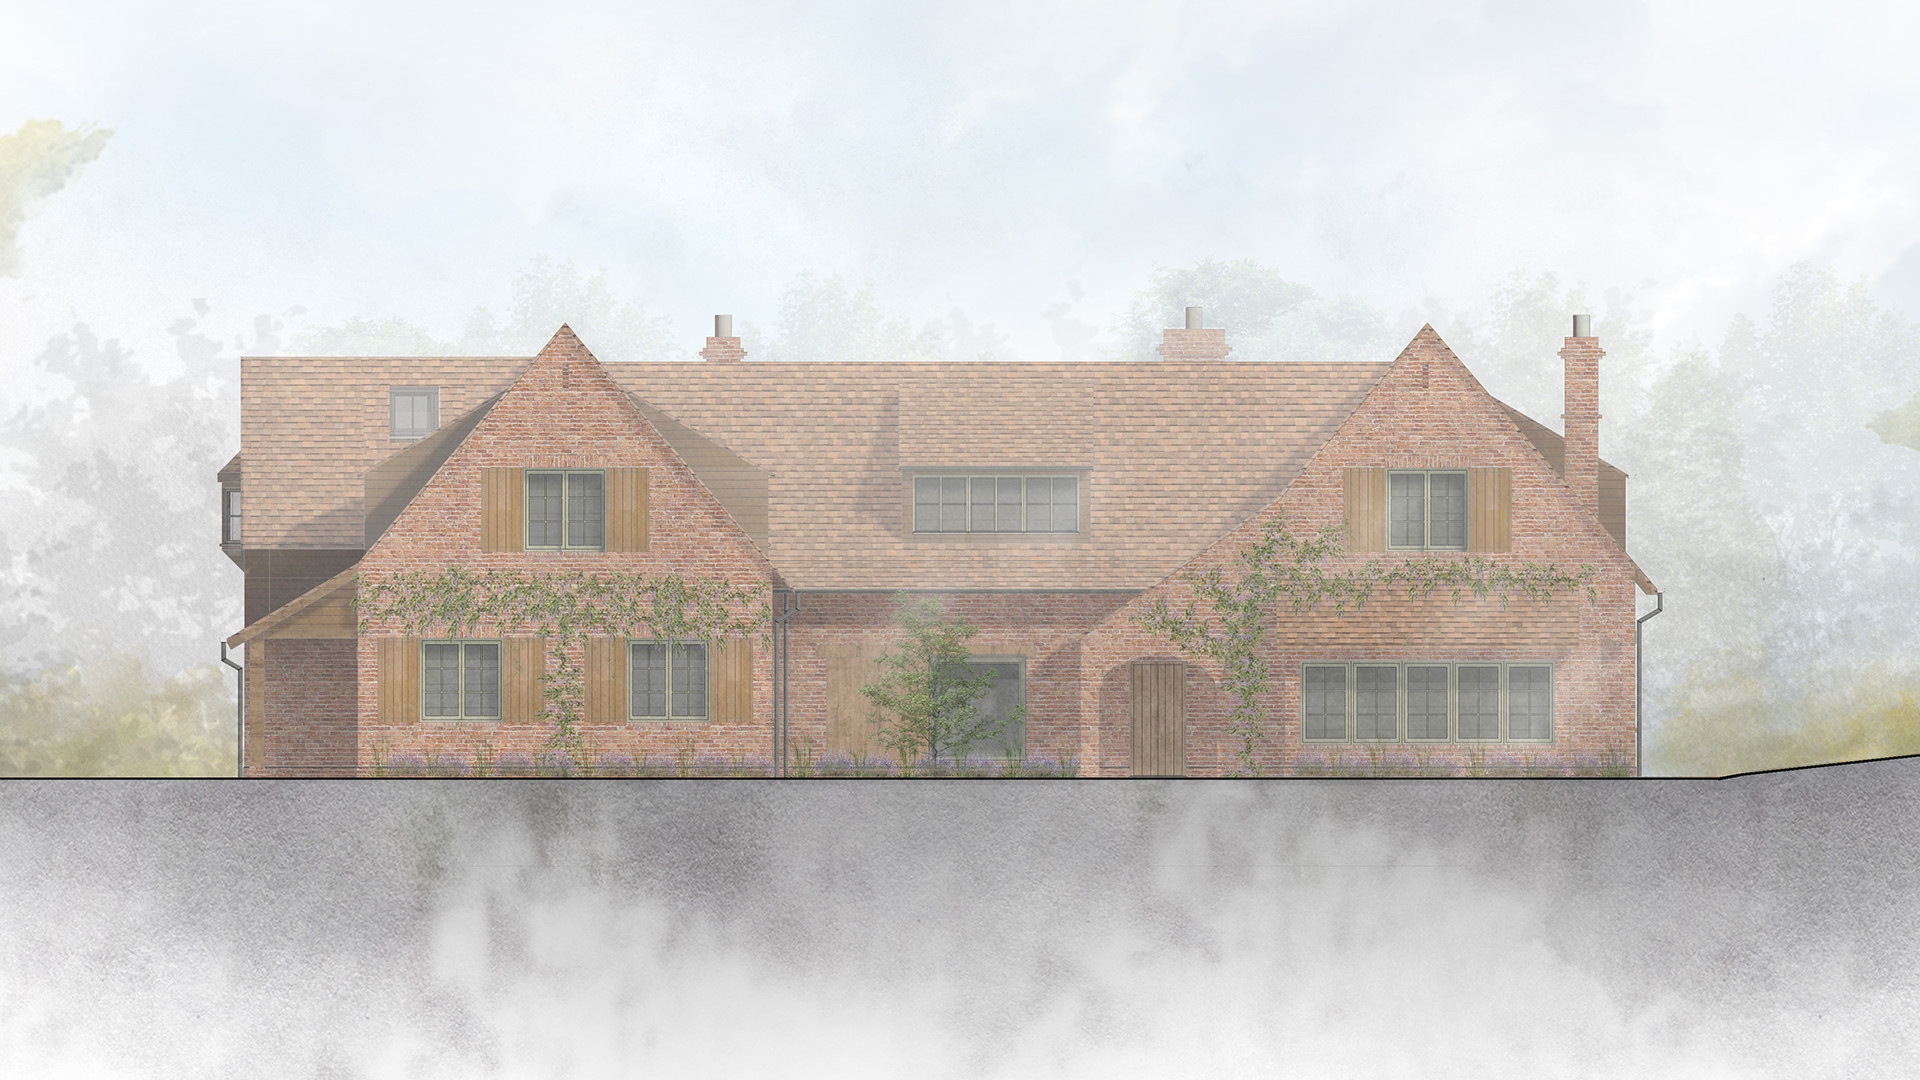 New Home Planning Permission, Hampshire Architects, Richmond Bell Architects, Wiltshire